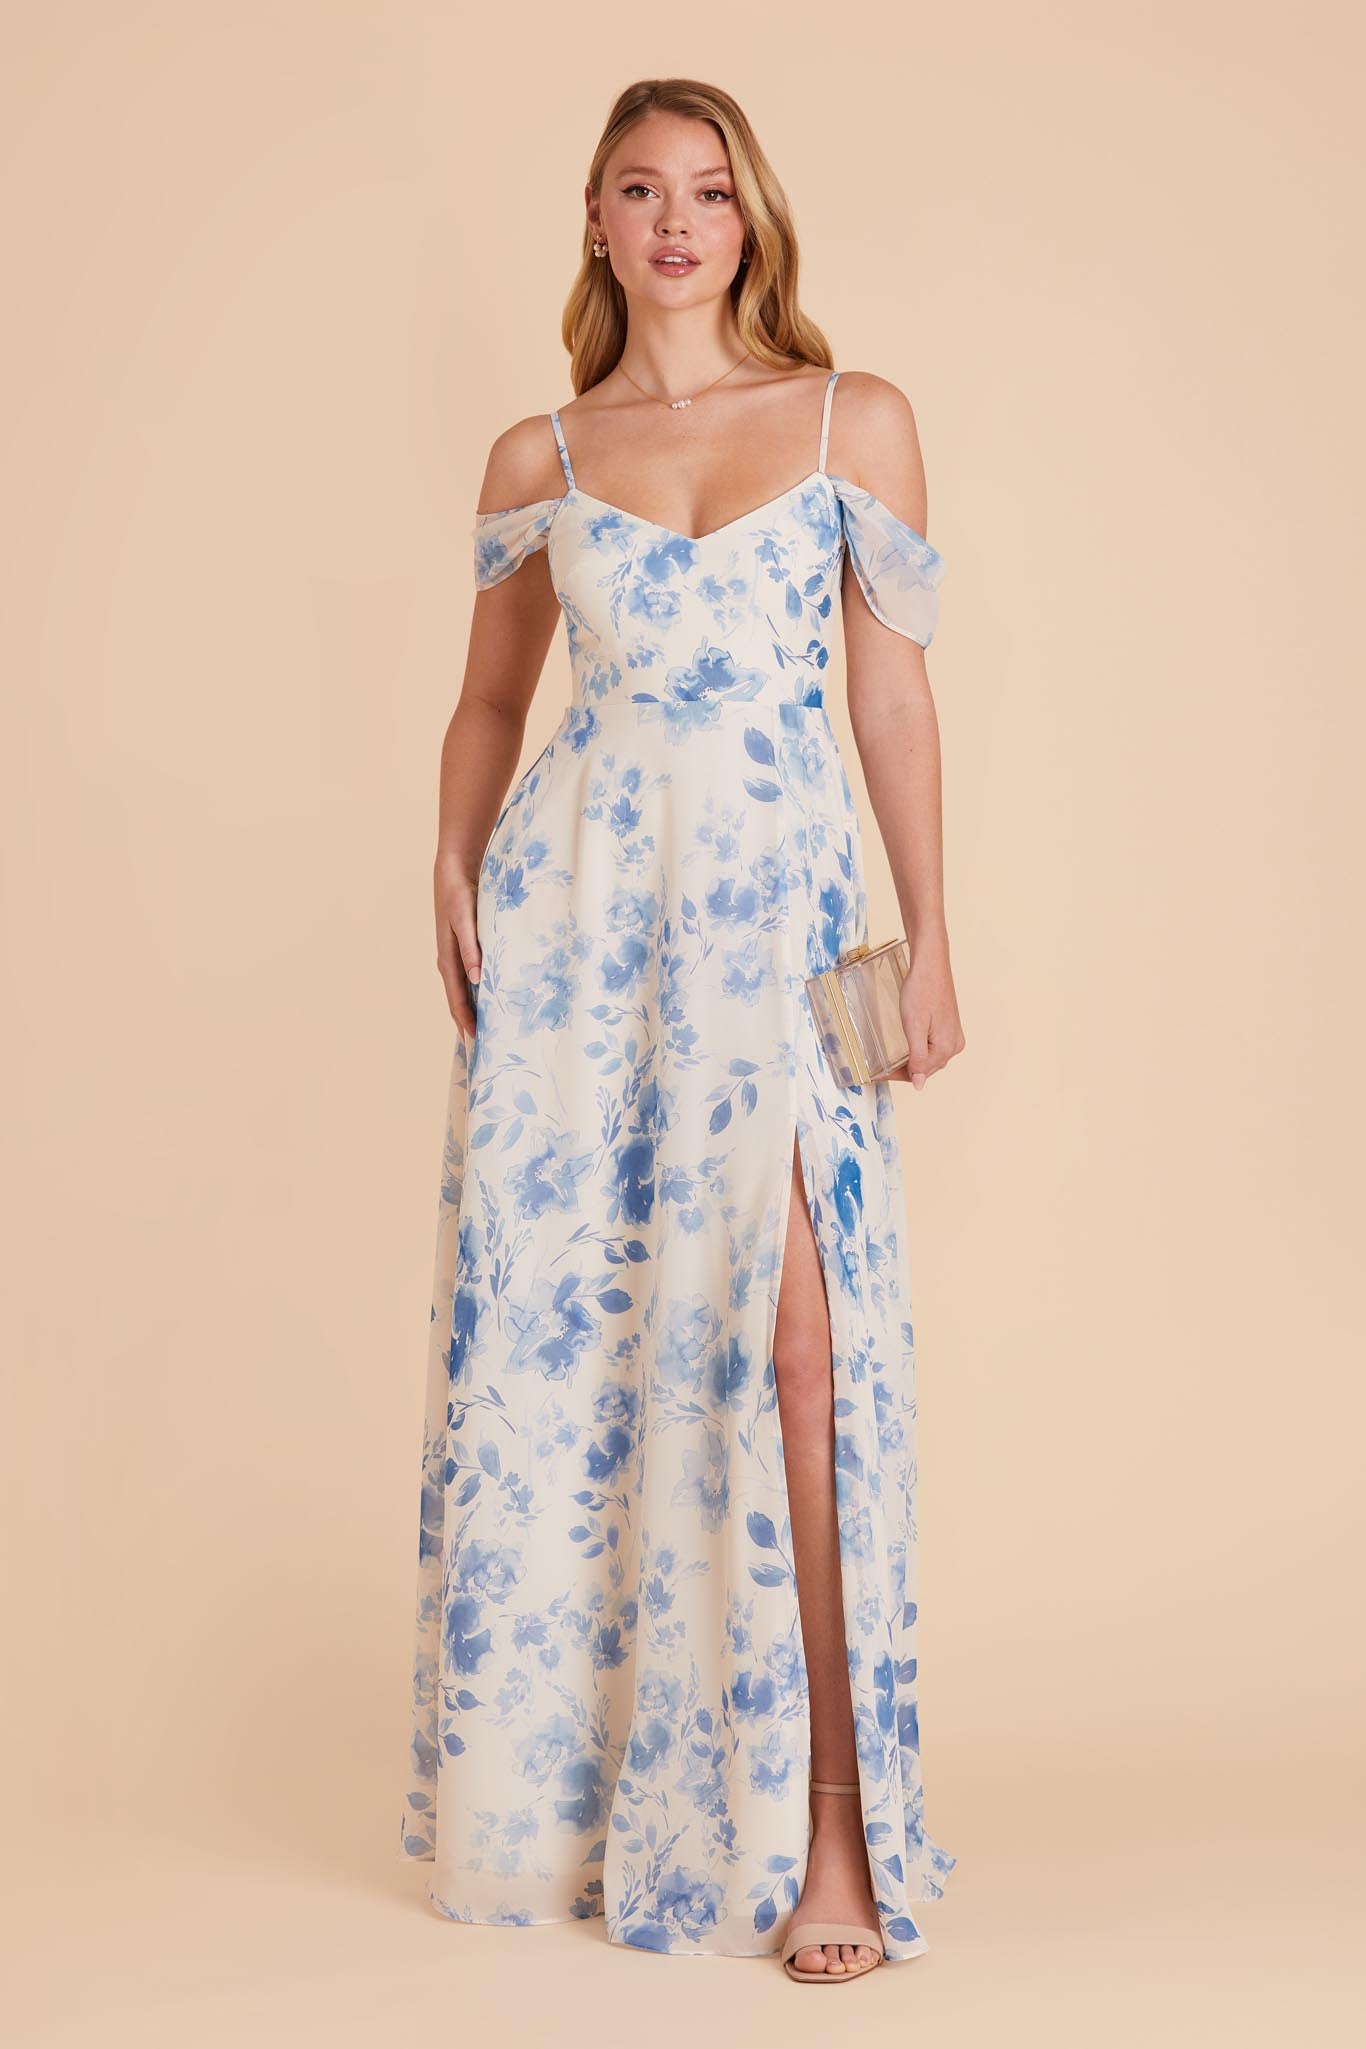 Blue Rococo Floral Devin Convertible Dress by Birdy Grey